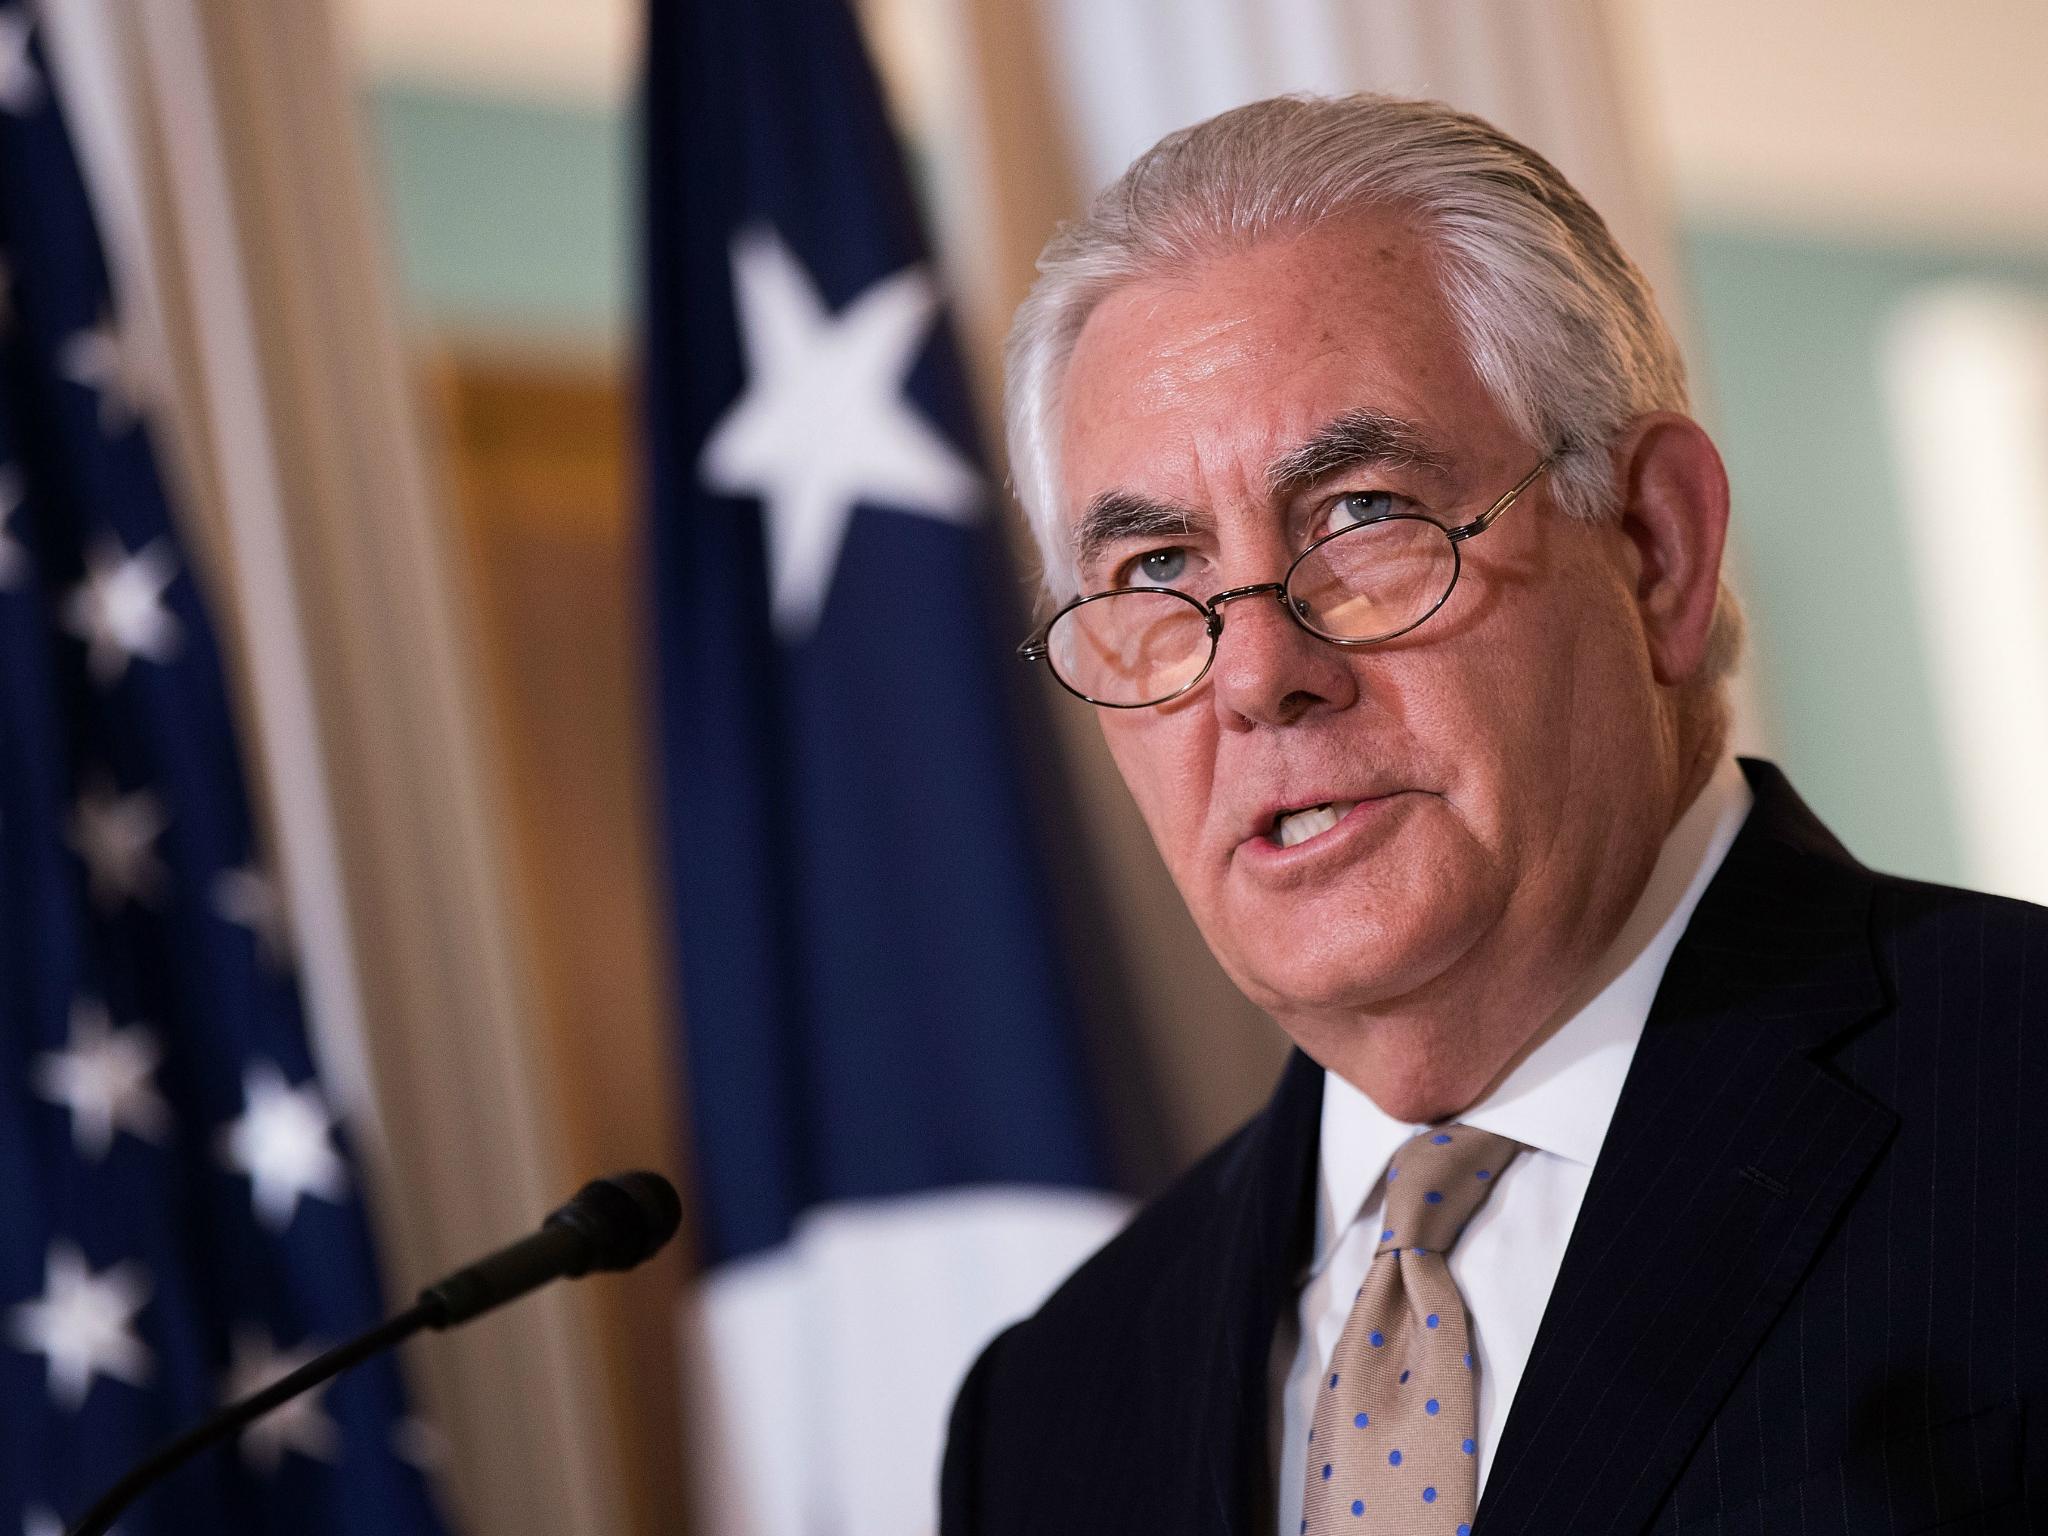 Rex Tillerson said life as Exxon Mobil CEO was 'easier' in terms of making decisions compared to being Secretary of State